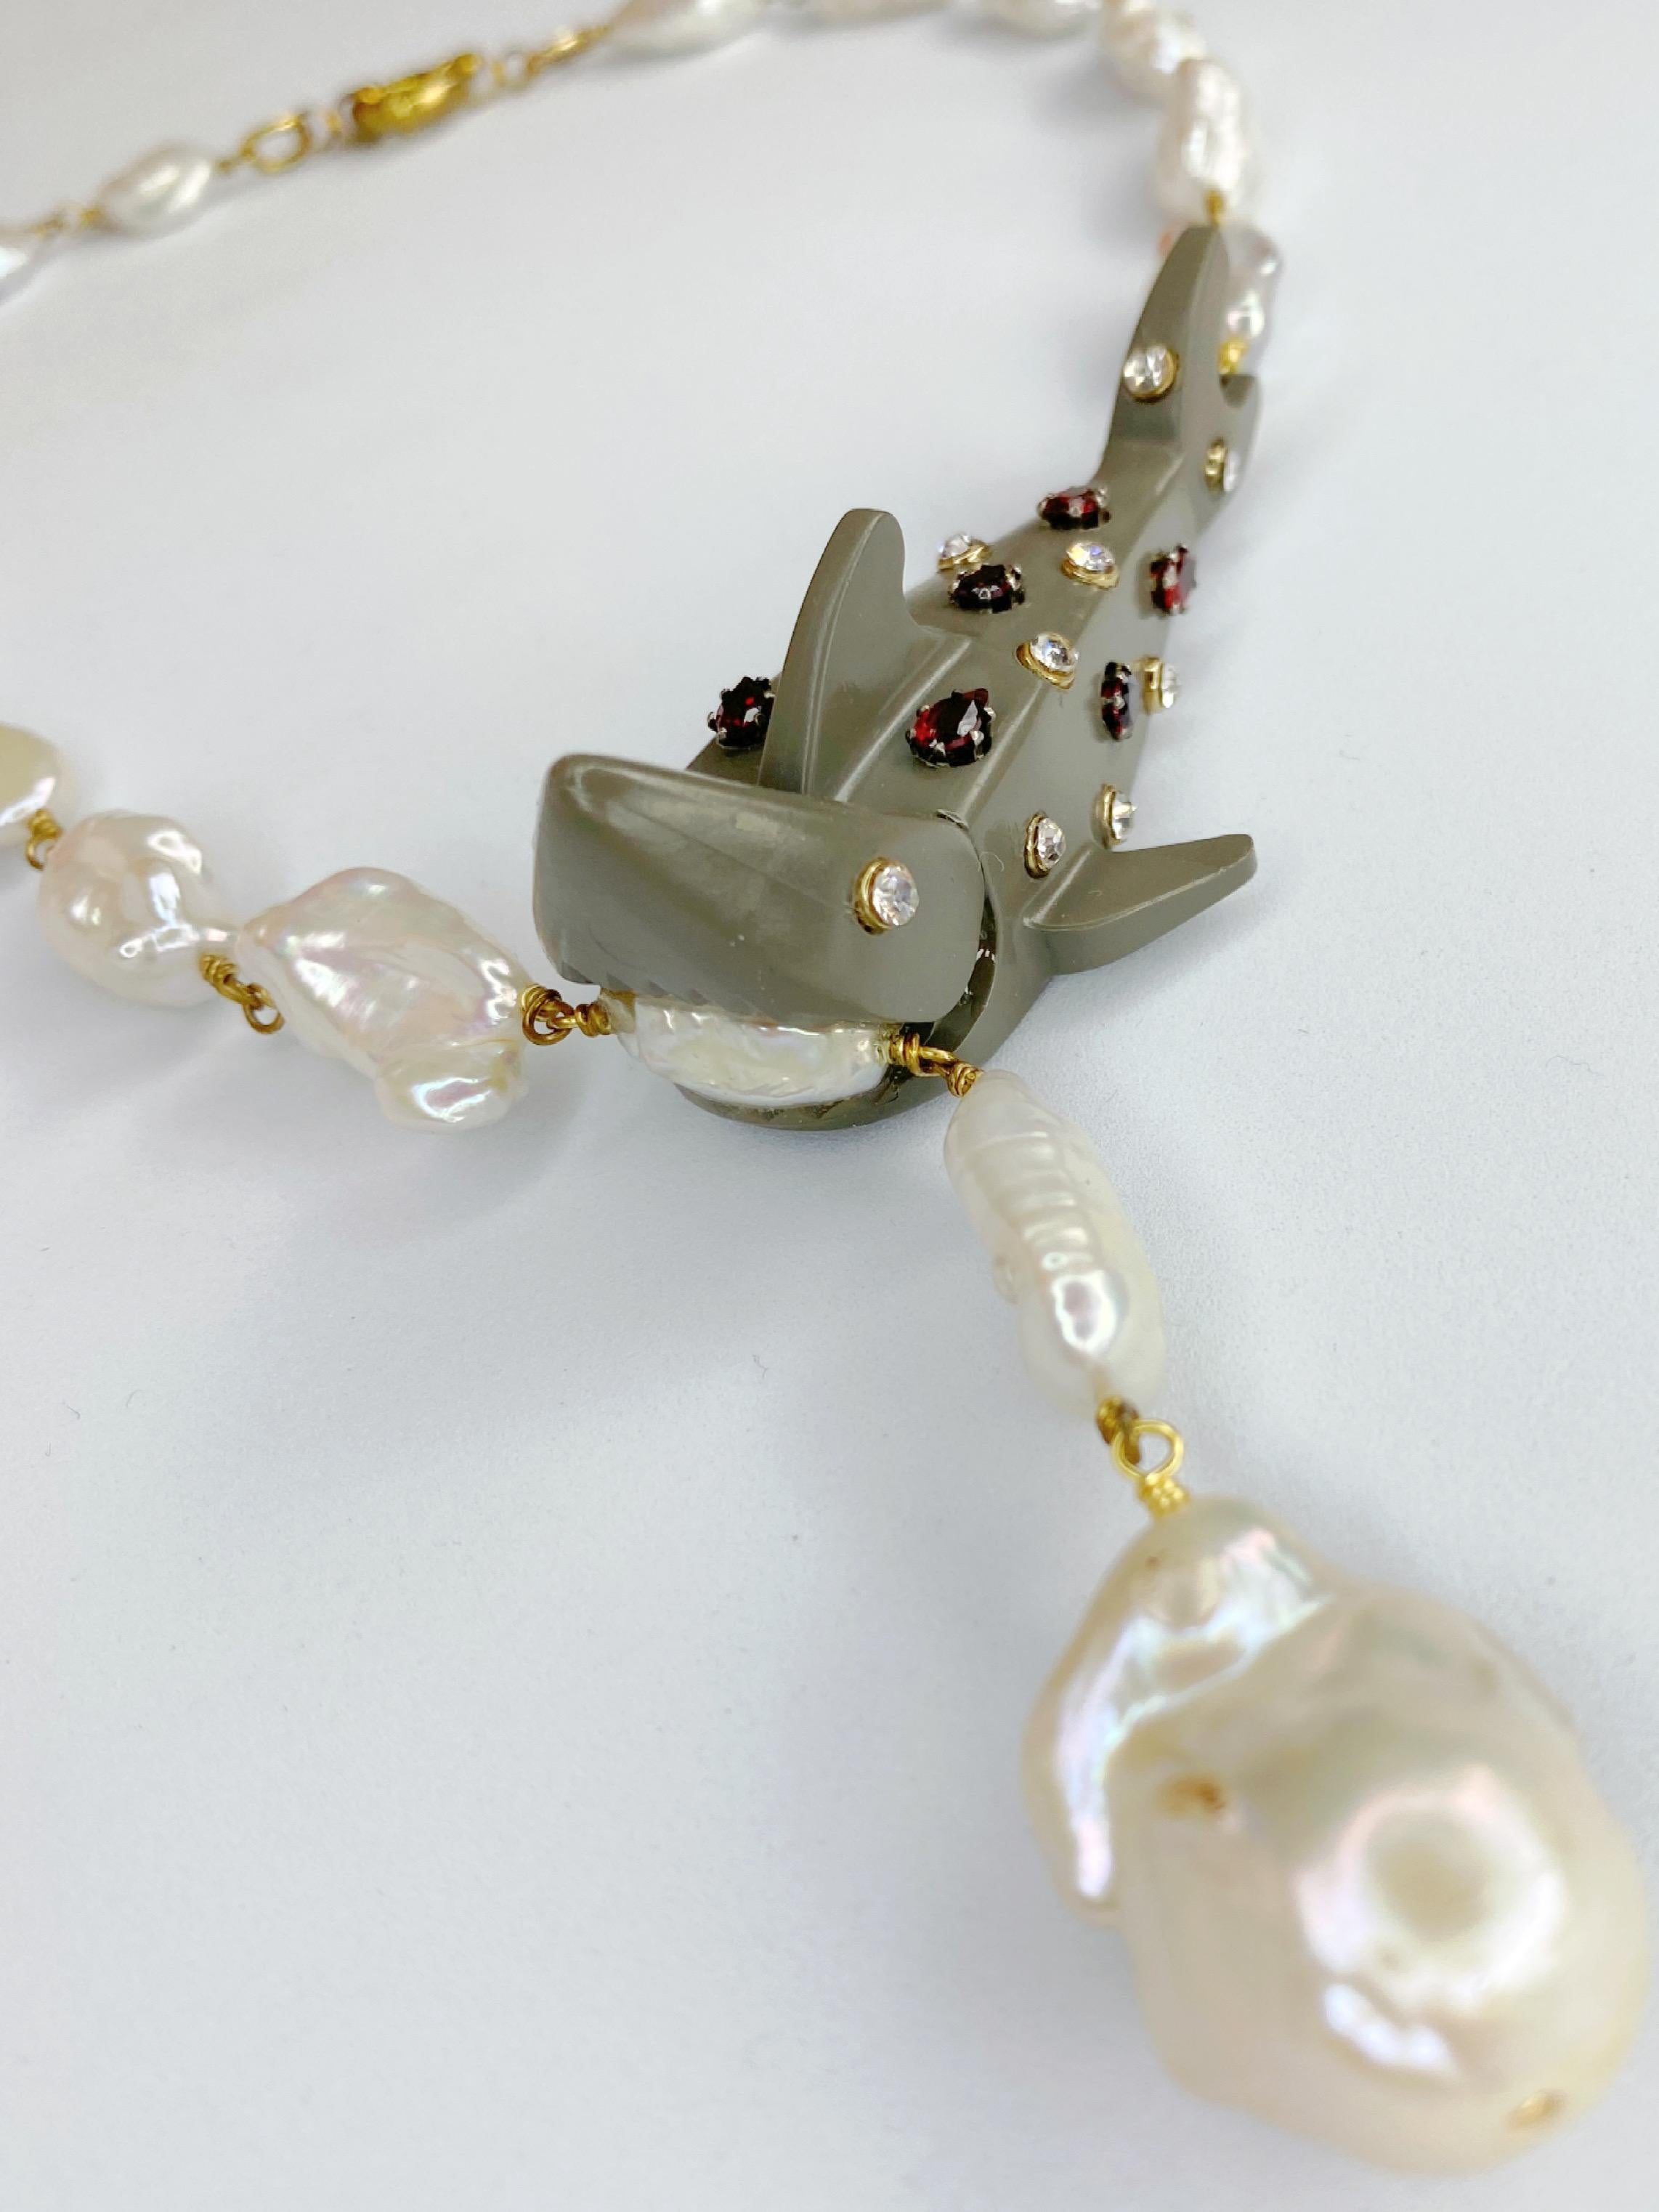 This original one of a kind necklace by Sebastian Jaramillo features barroque pearls and a LEGO shark set with Swarovski crystals and pear cut Garnets. This piece is a sure conversation starter.